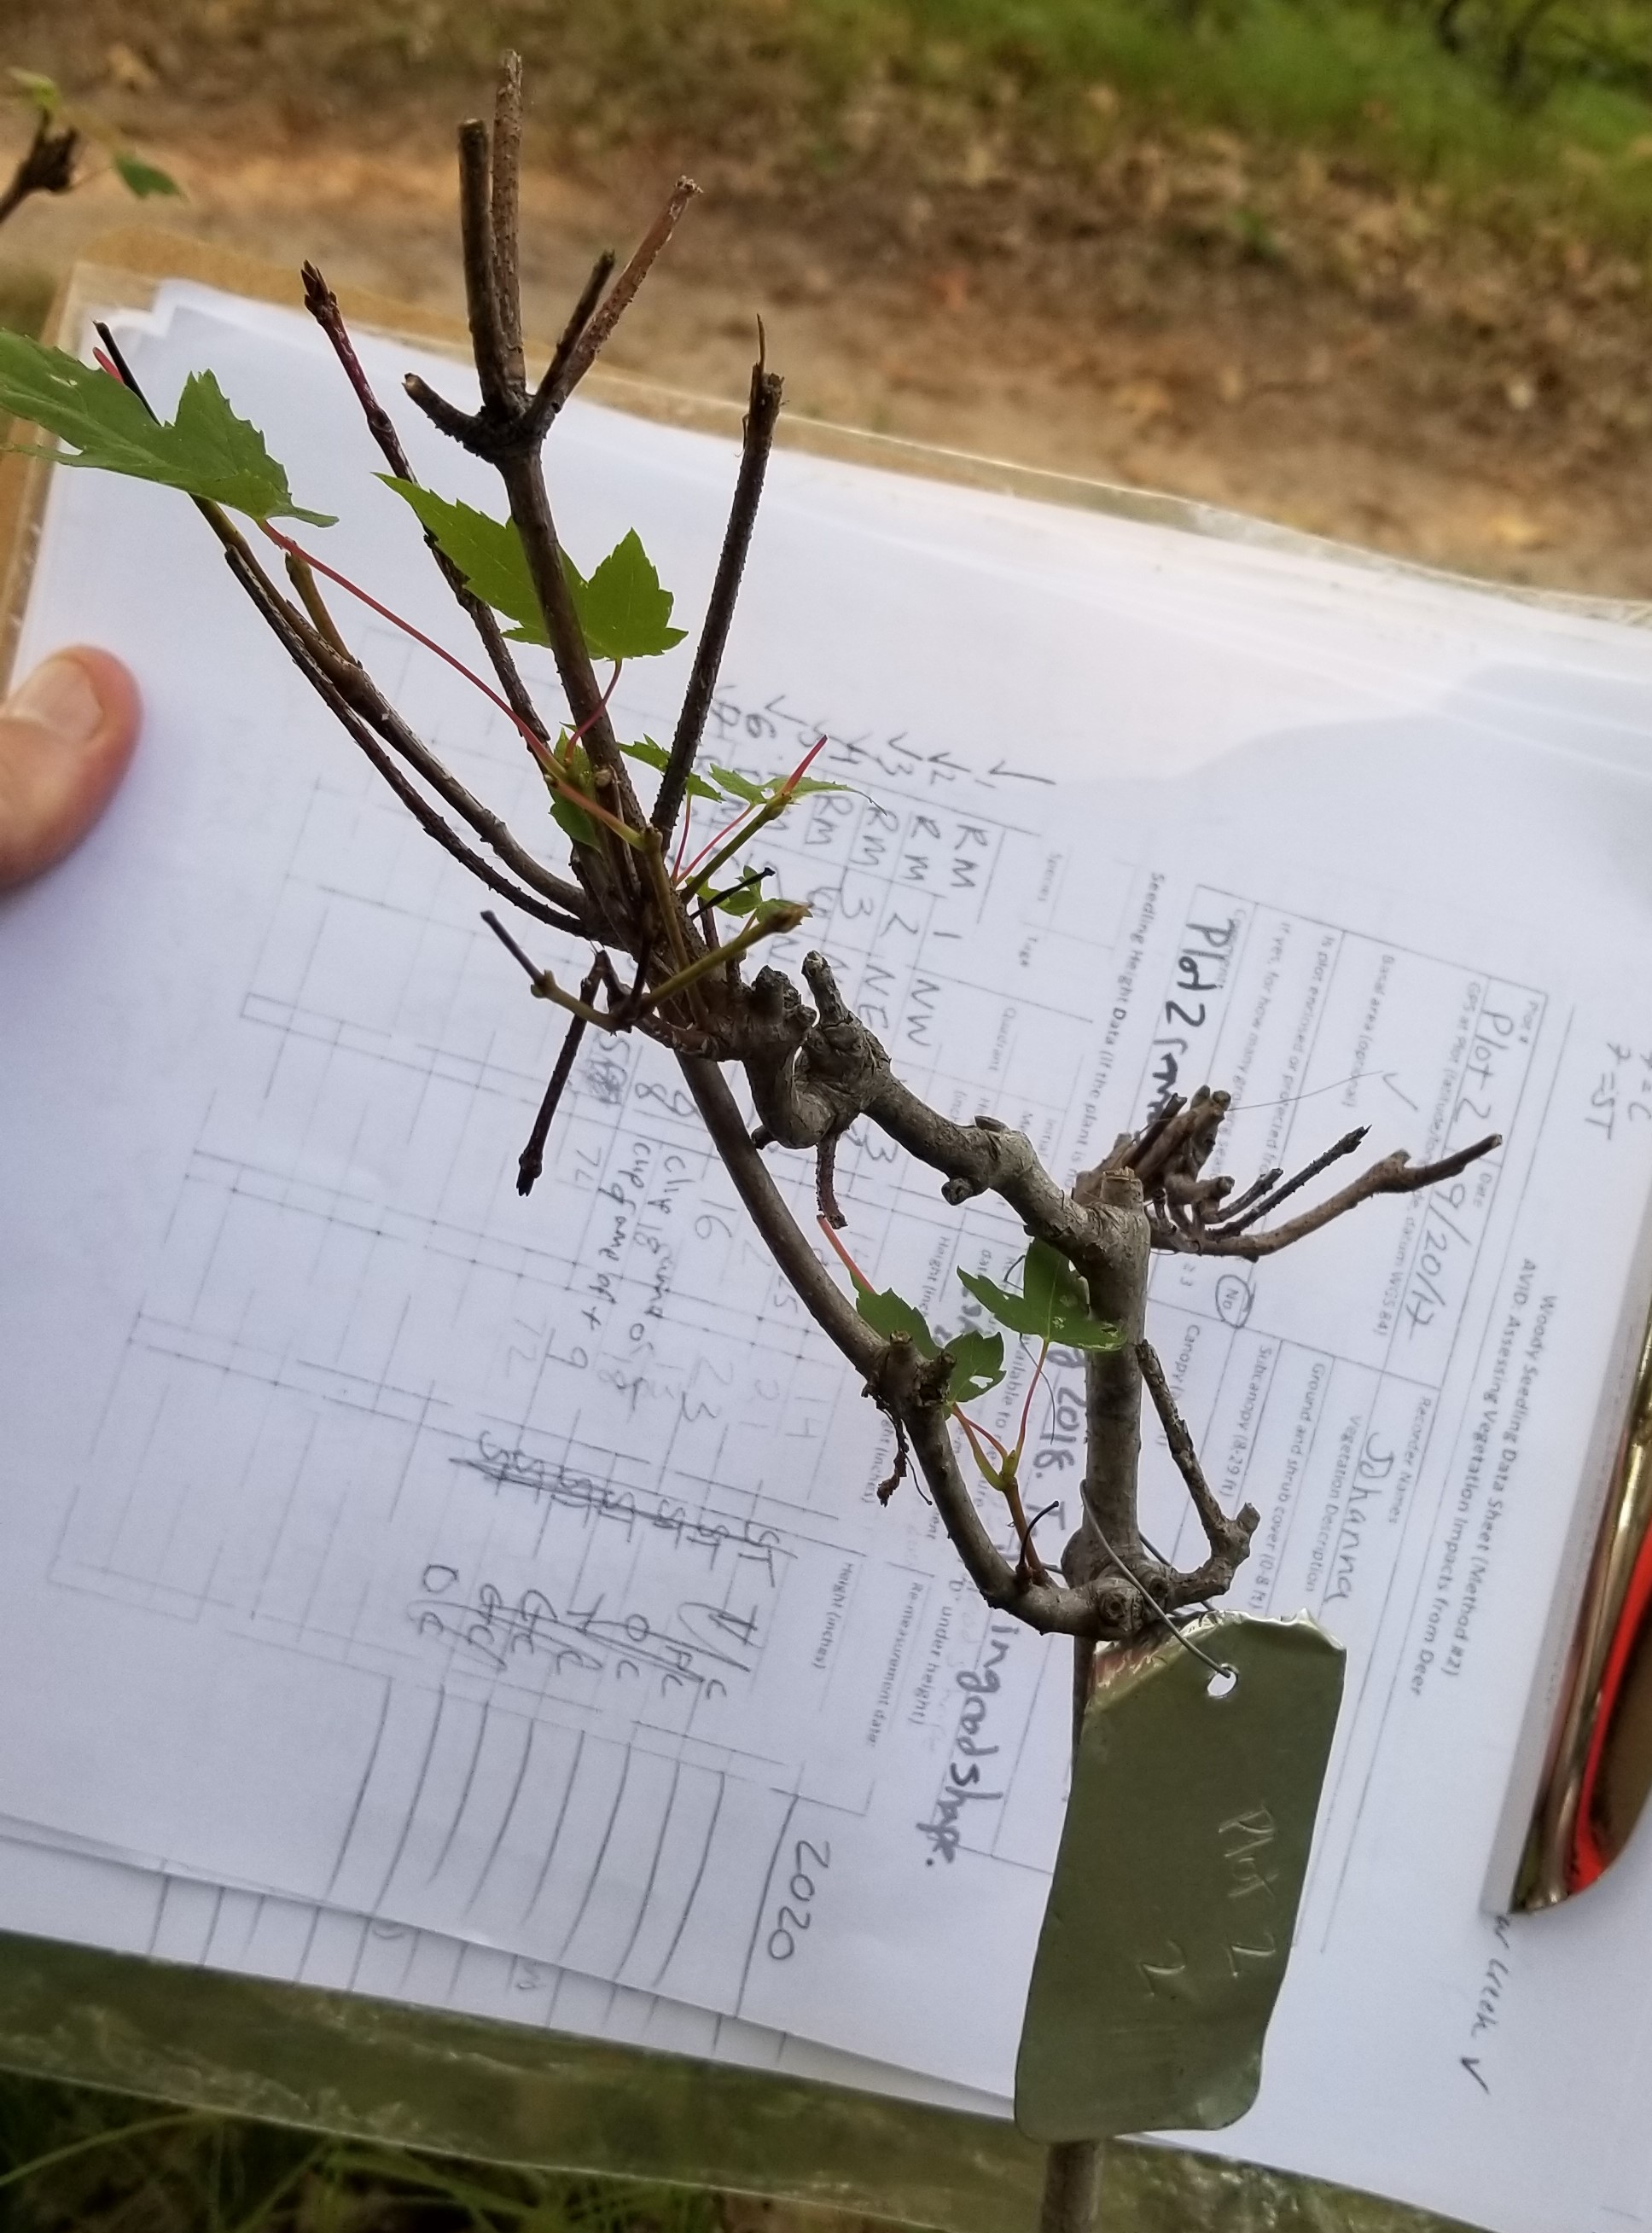 Tree seedling showing evidence of continual browse damage from white-tailed deer. Photo by the author.